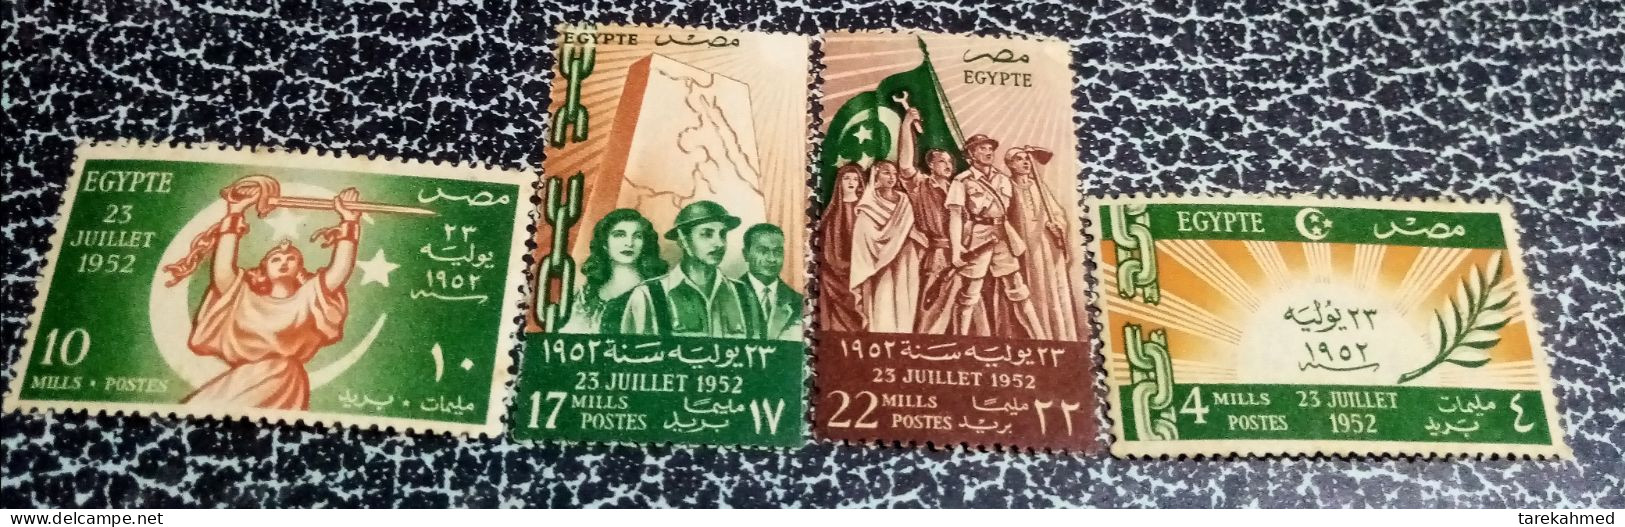 Egypt 1952 - Complete Set Of The Change Of Government, July 23 Revolution , 1952 )  - MNH - Unused Stamps